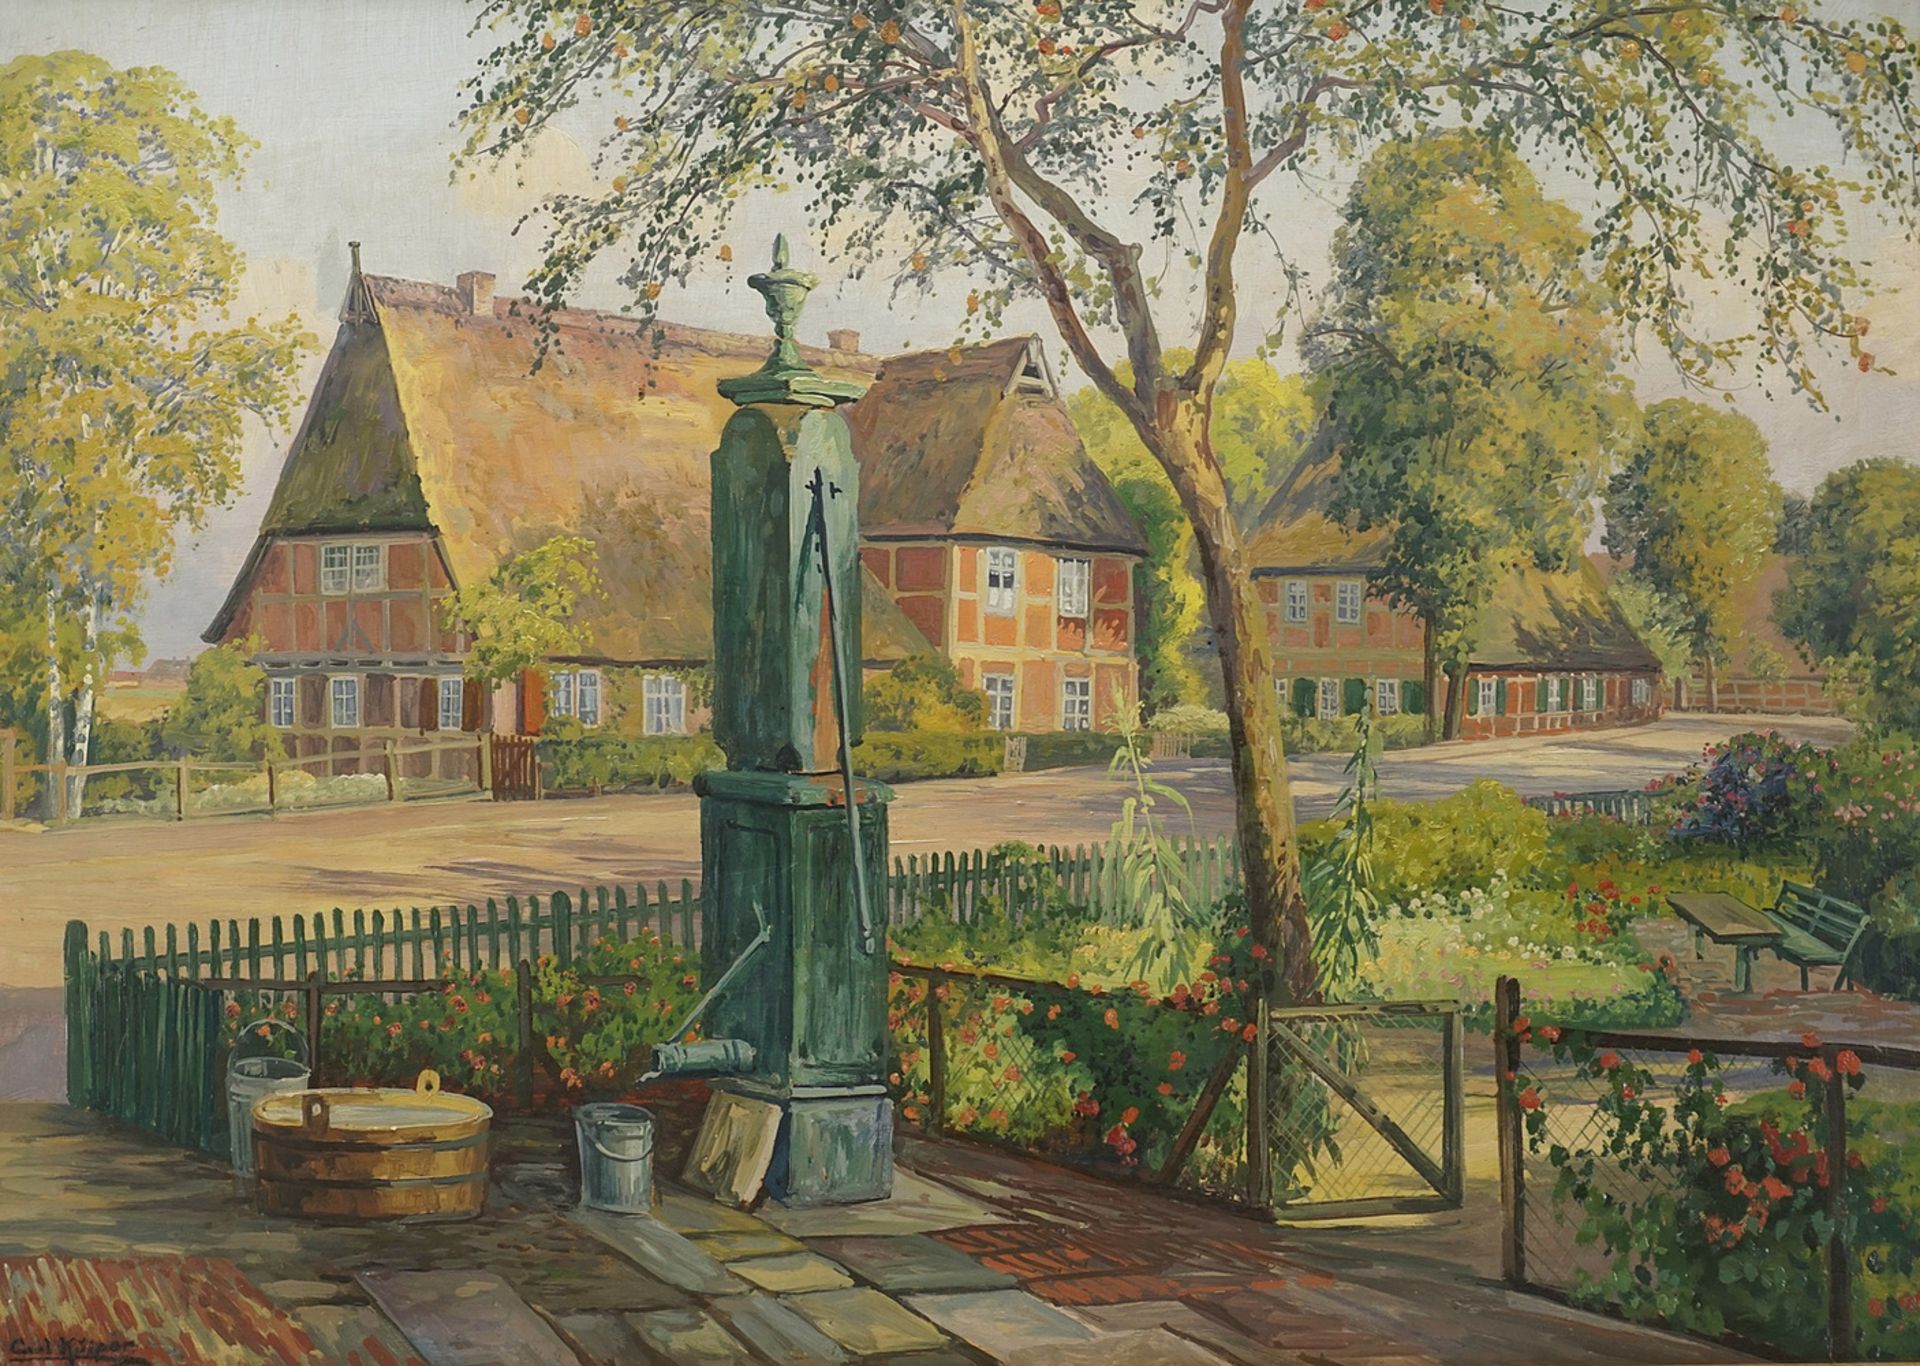 Carl Kuiper (1865-1930), Village view with well